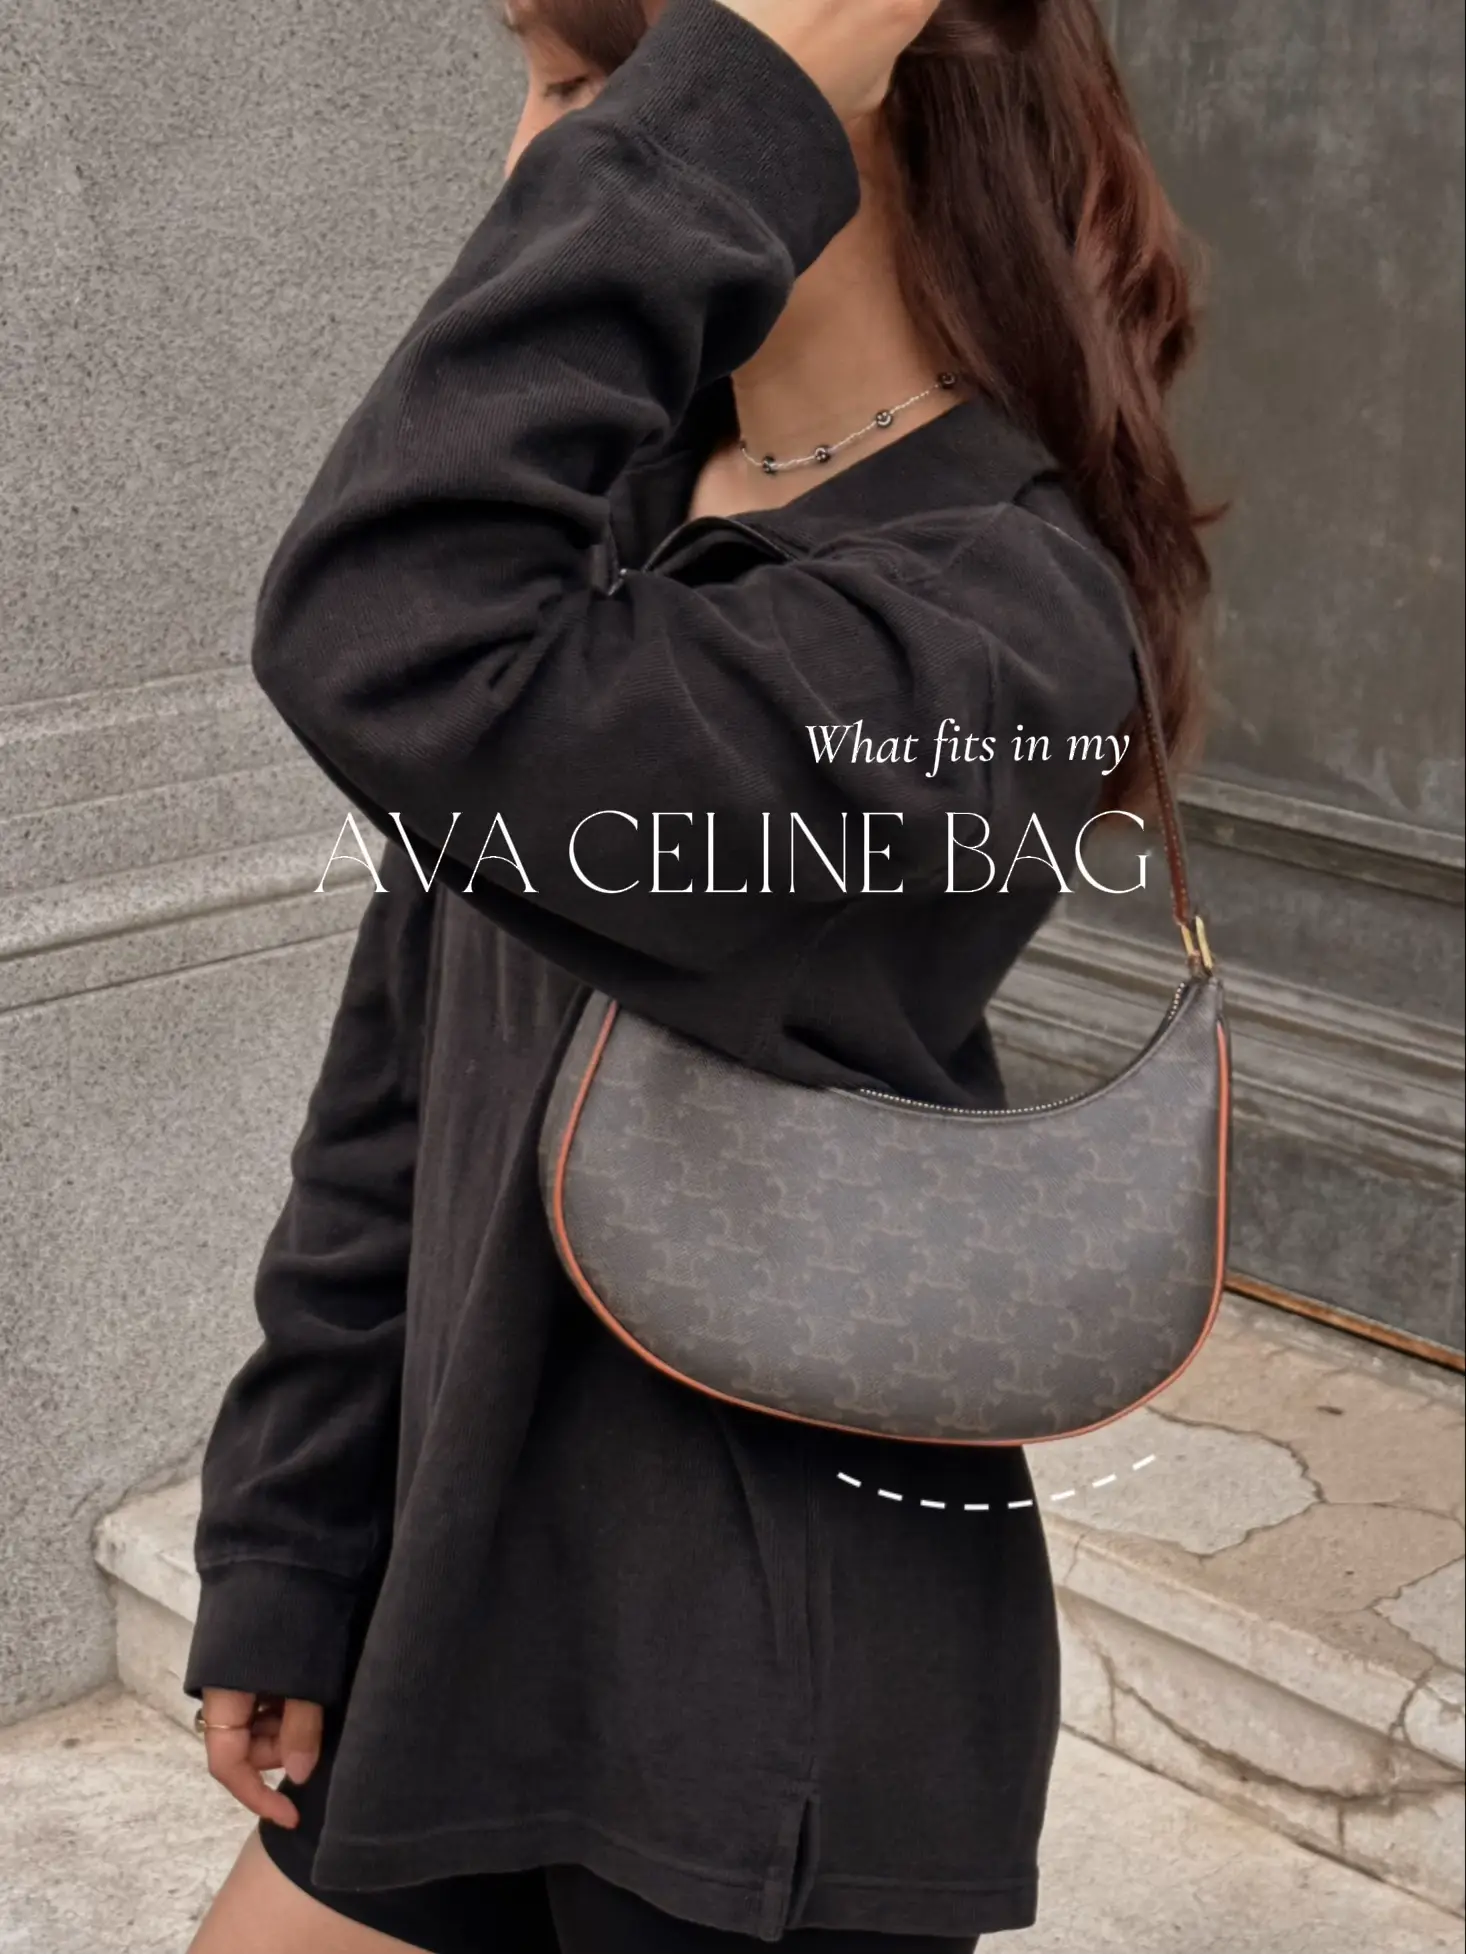 Celine Ava Bag Review  Styling for Autumn, what fits inside, will this bag  last? 